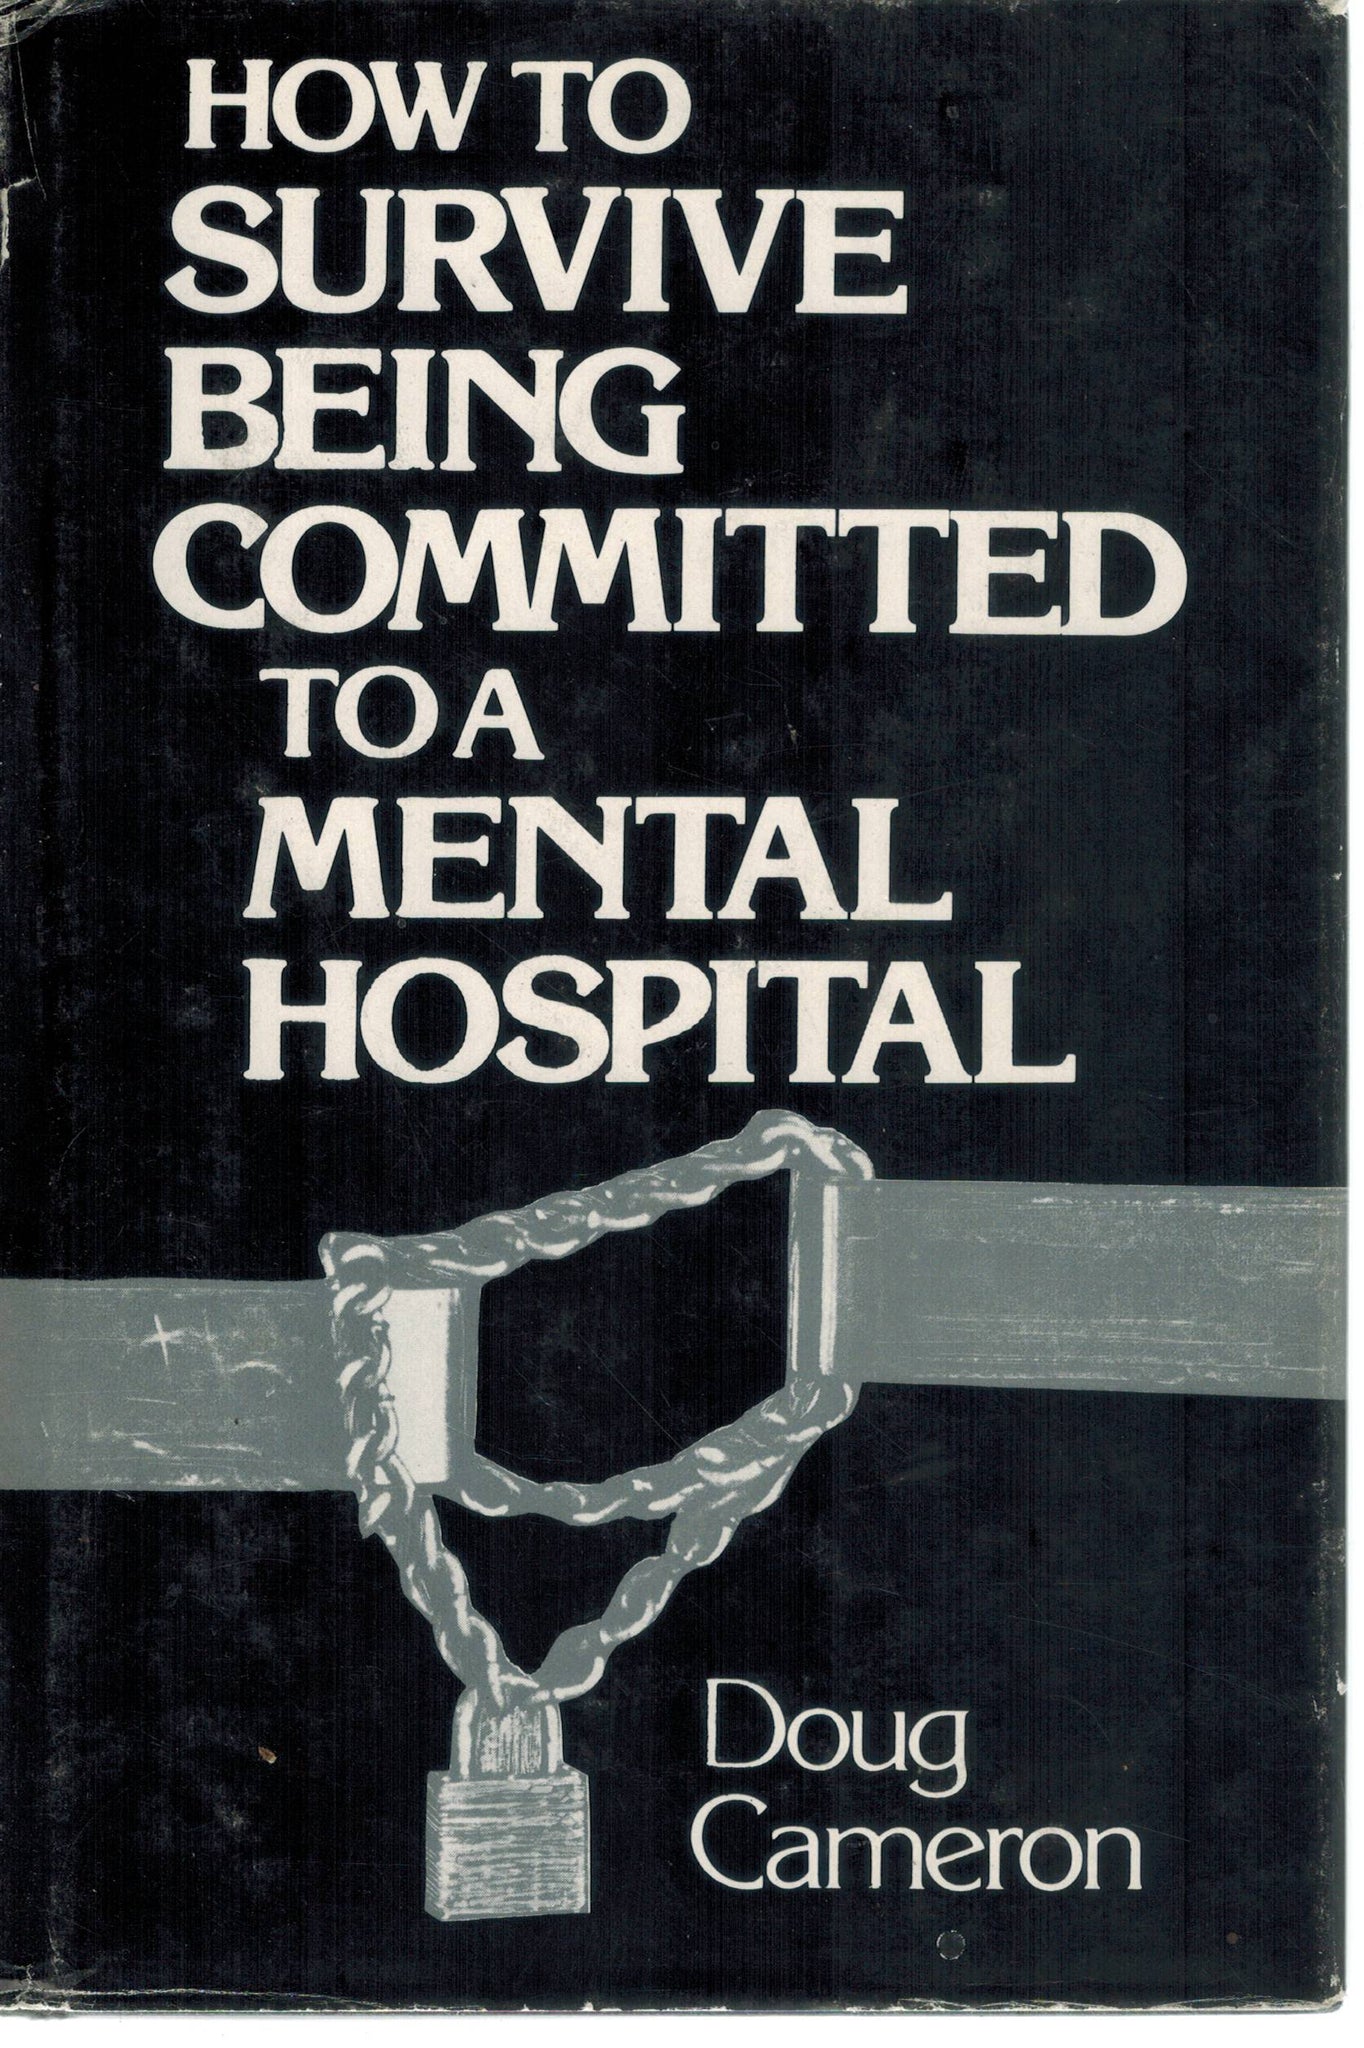 How to survive being committed to a mental hospital